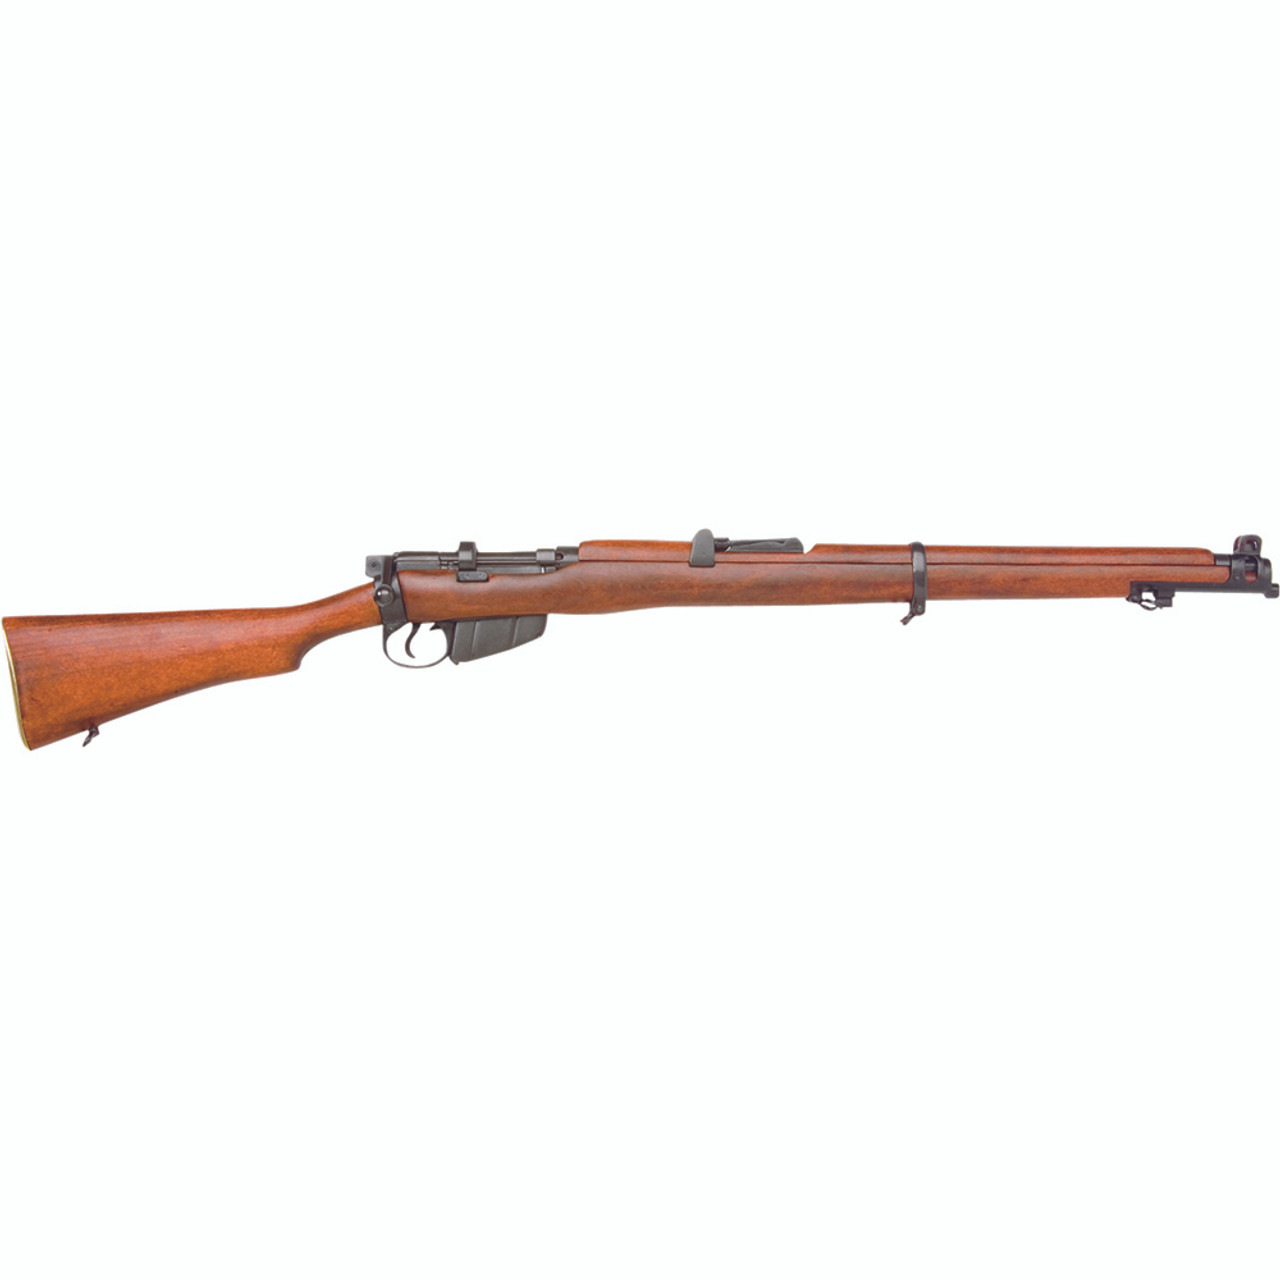 The Lee Enfield Rifle